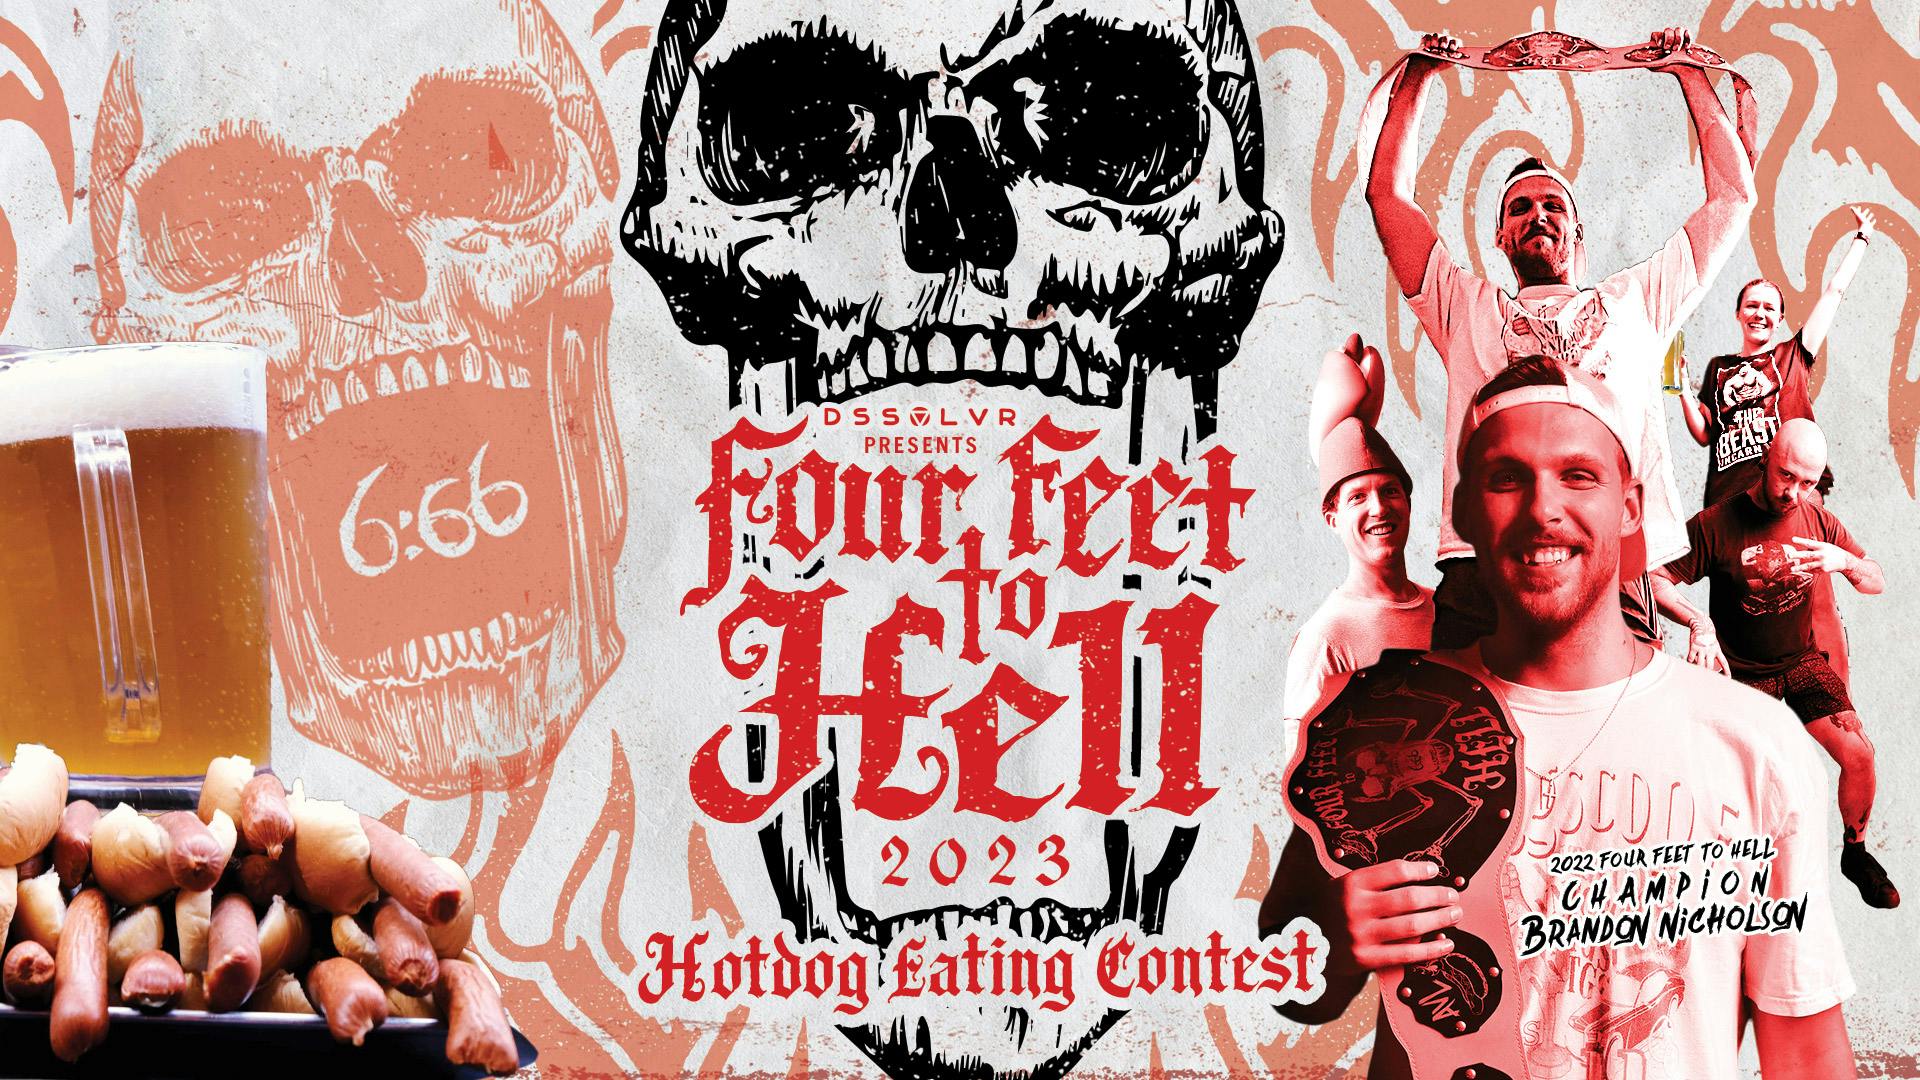 Four-Feet-To-Hell-2023-banner